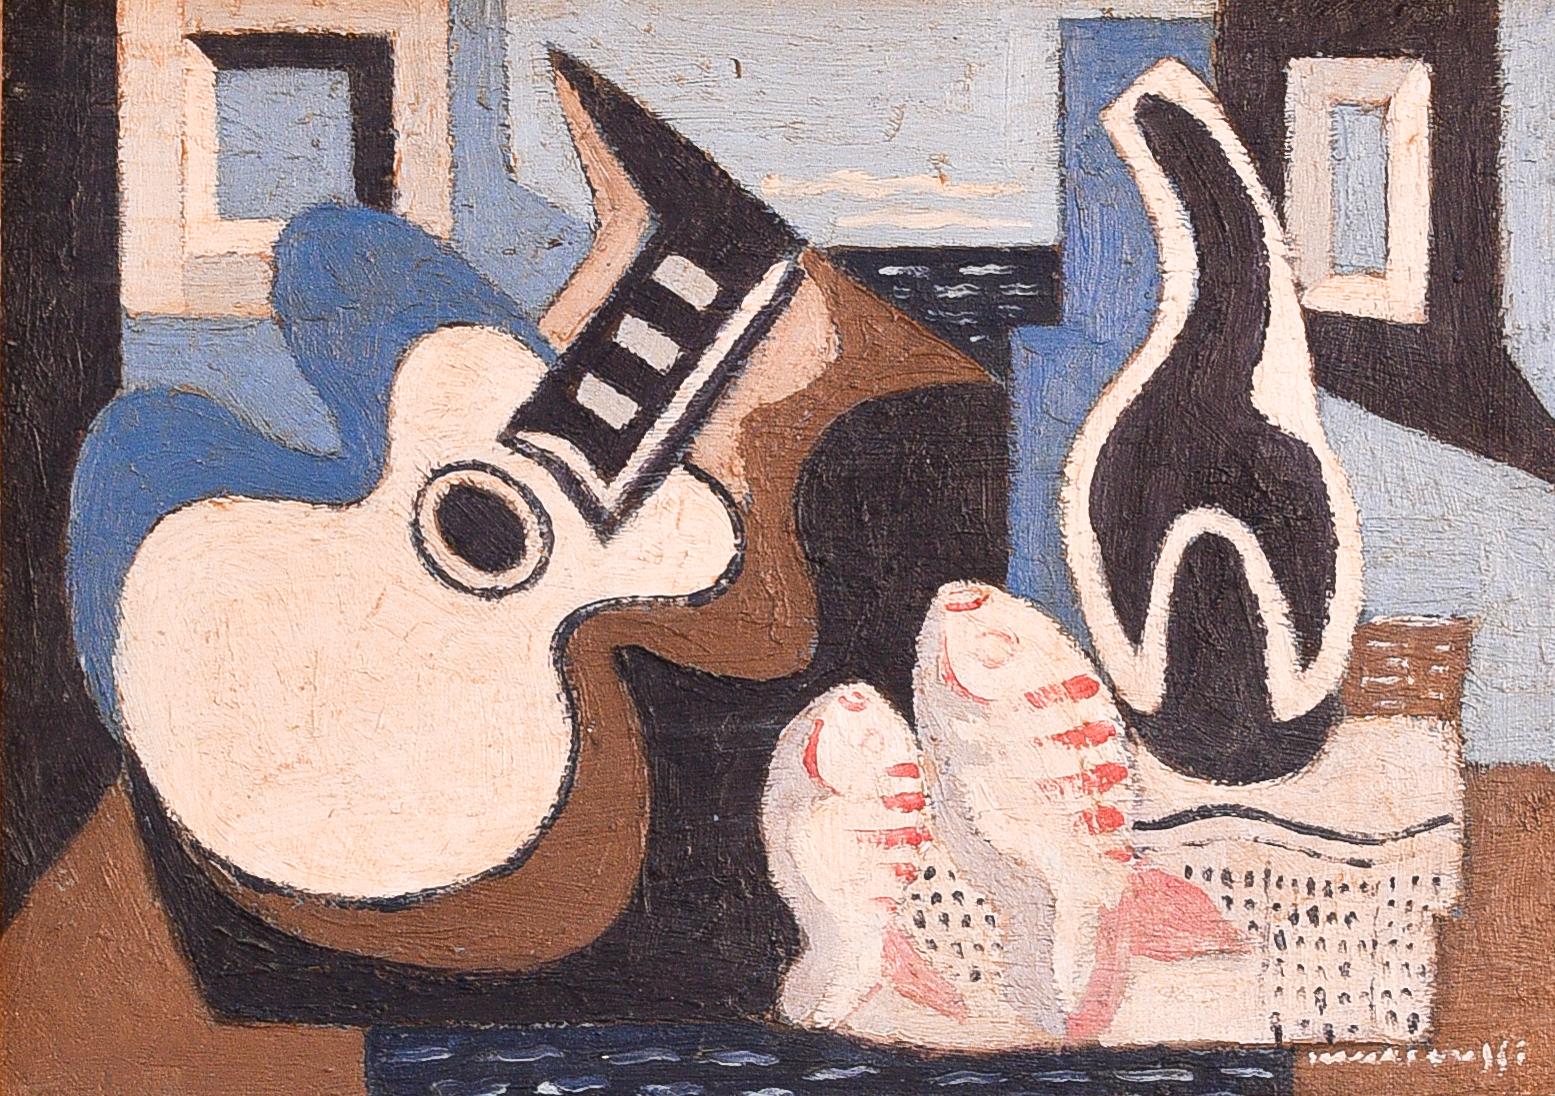 Early 20th century oil on board cubist still life with guitar and fishes  - Cubist Painting by Louis Marcoussis